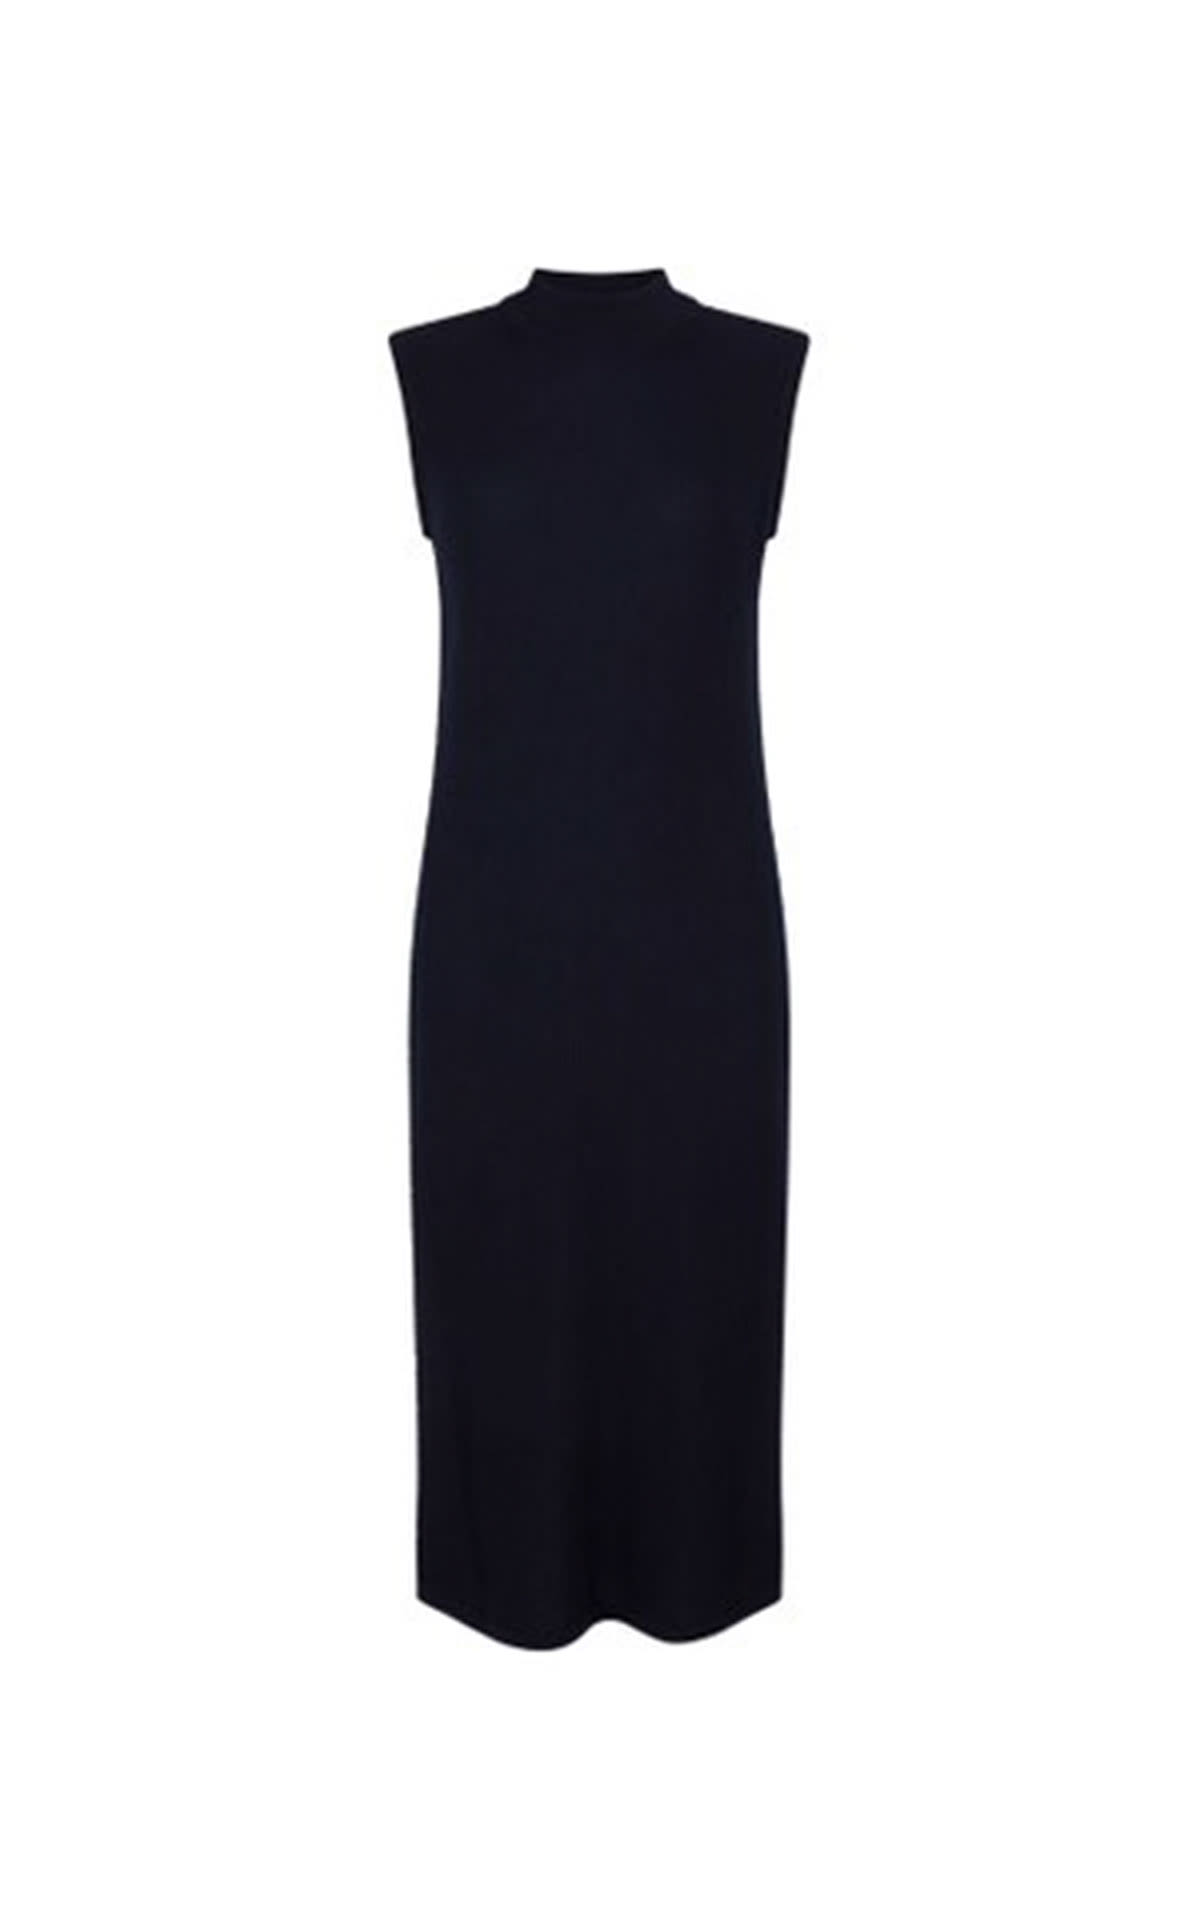 N.Peal Sleeveless mock neck dress navy from Bicester Village